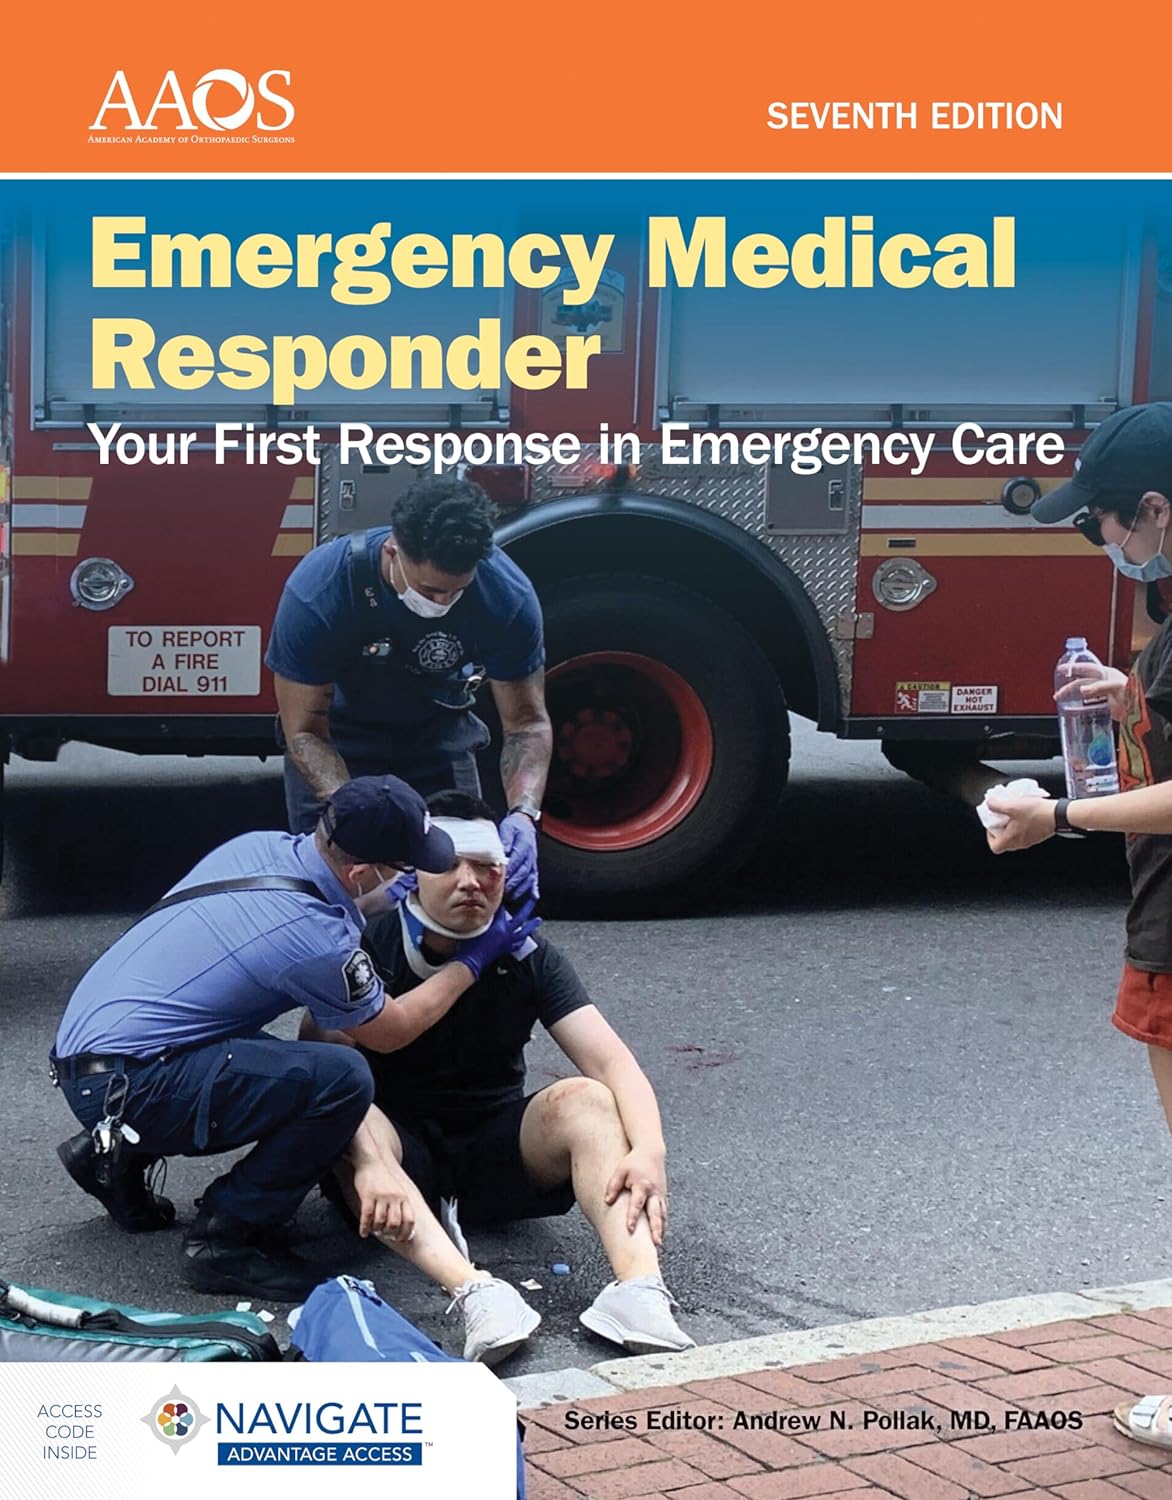 A test bank image for Emergency Medical Responder: Your First Response in Emergency Care.